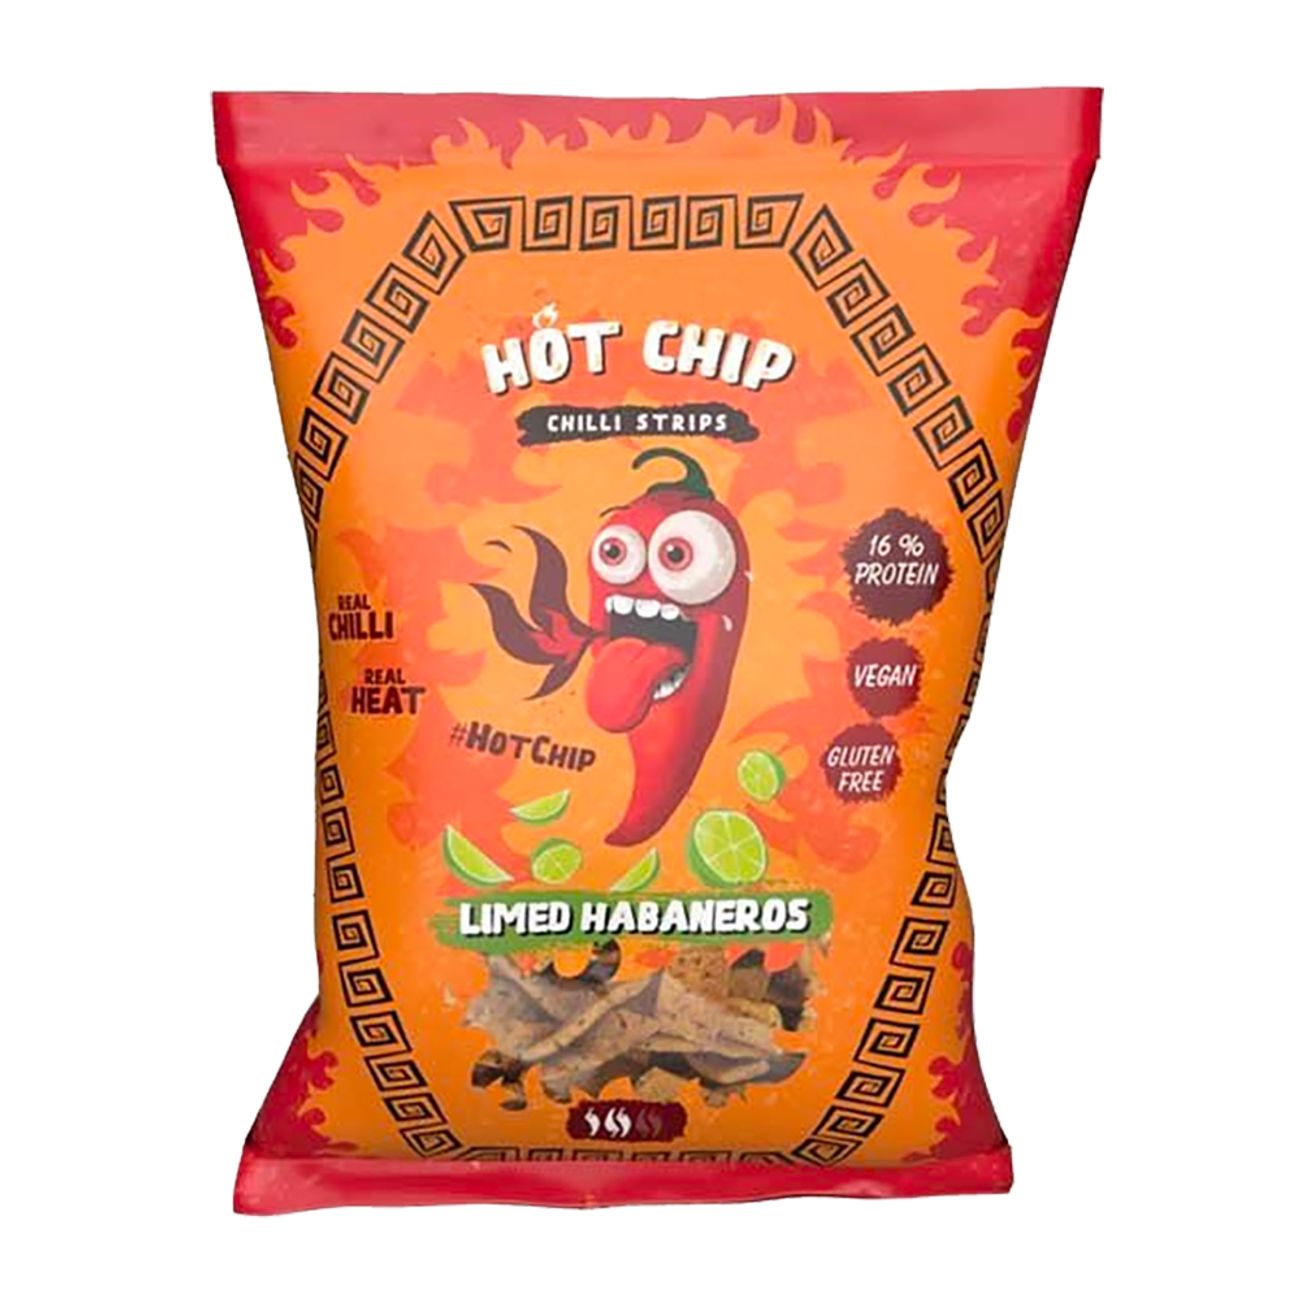 hot-chip-chilli-strips-limed-habanero-81052-1